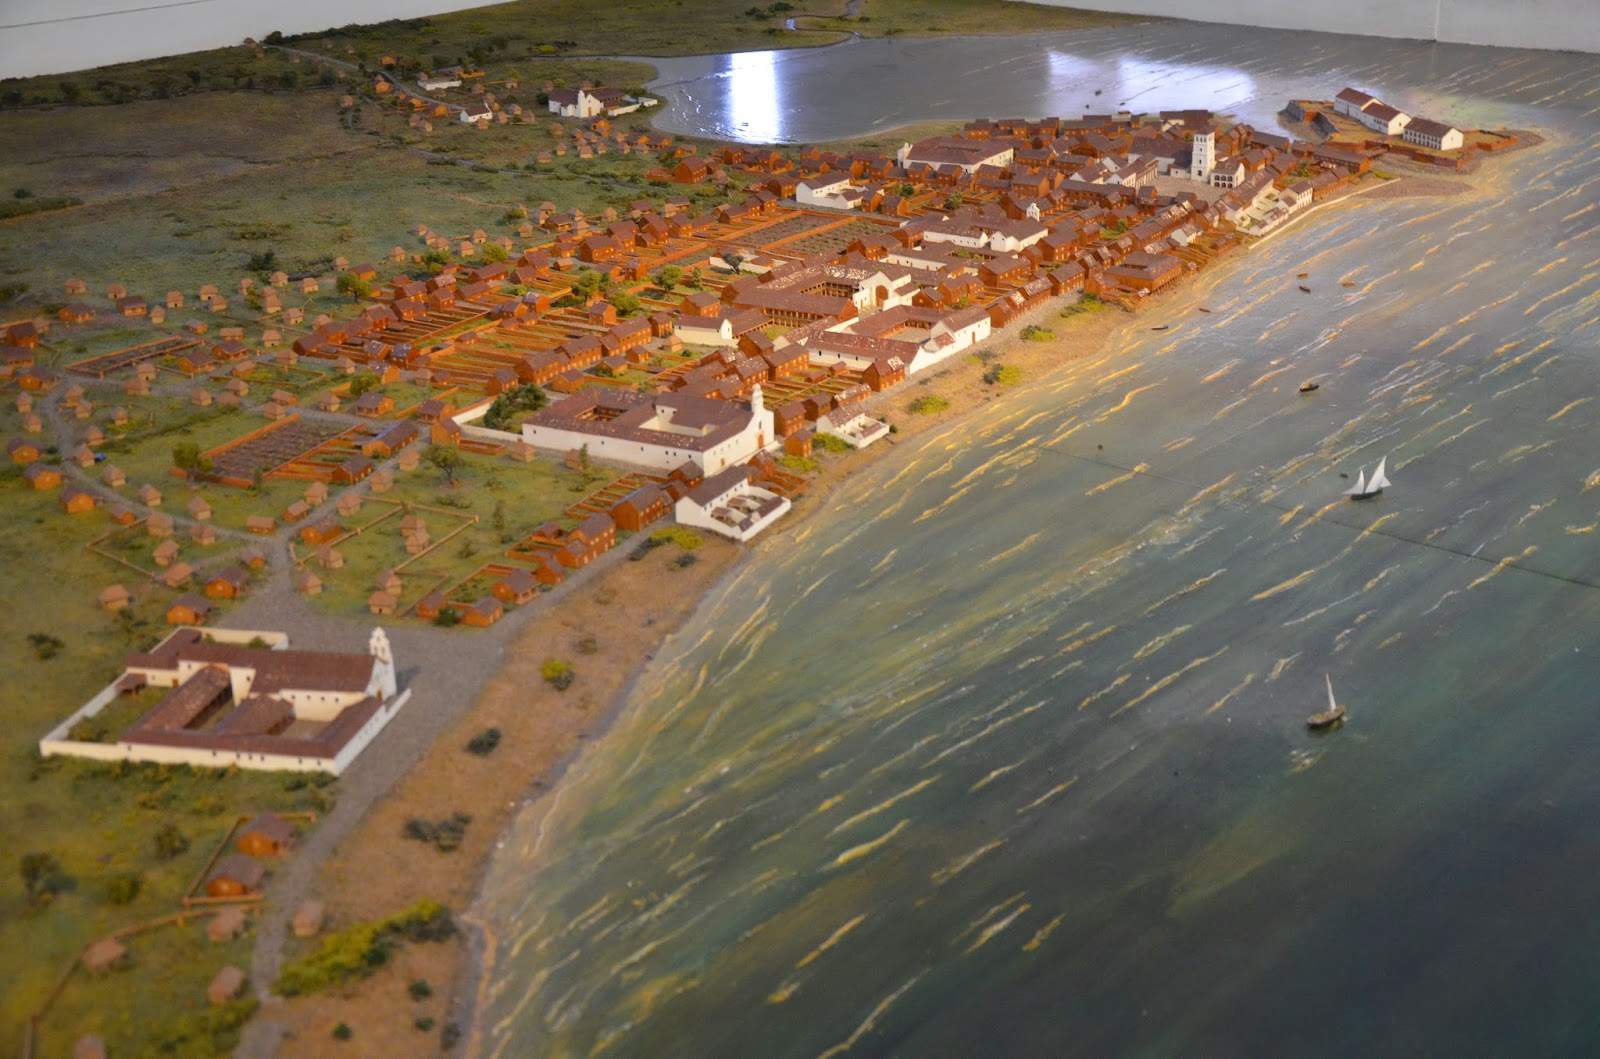 Scale model of old Panama City at the Museum at Panama Viejo